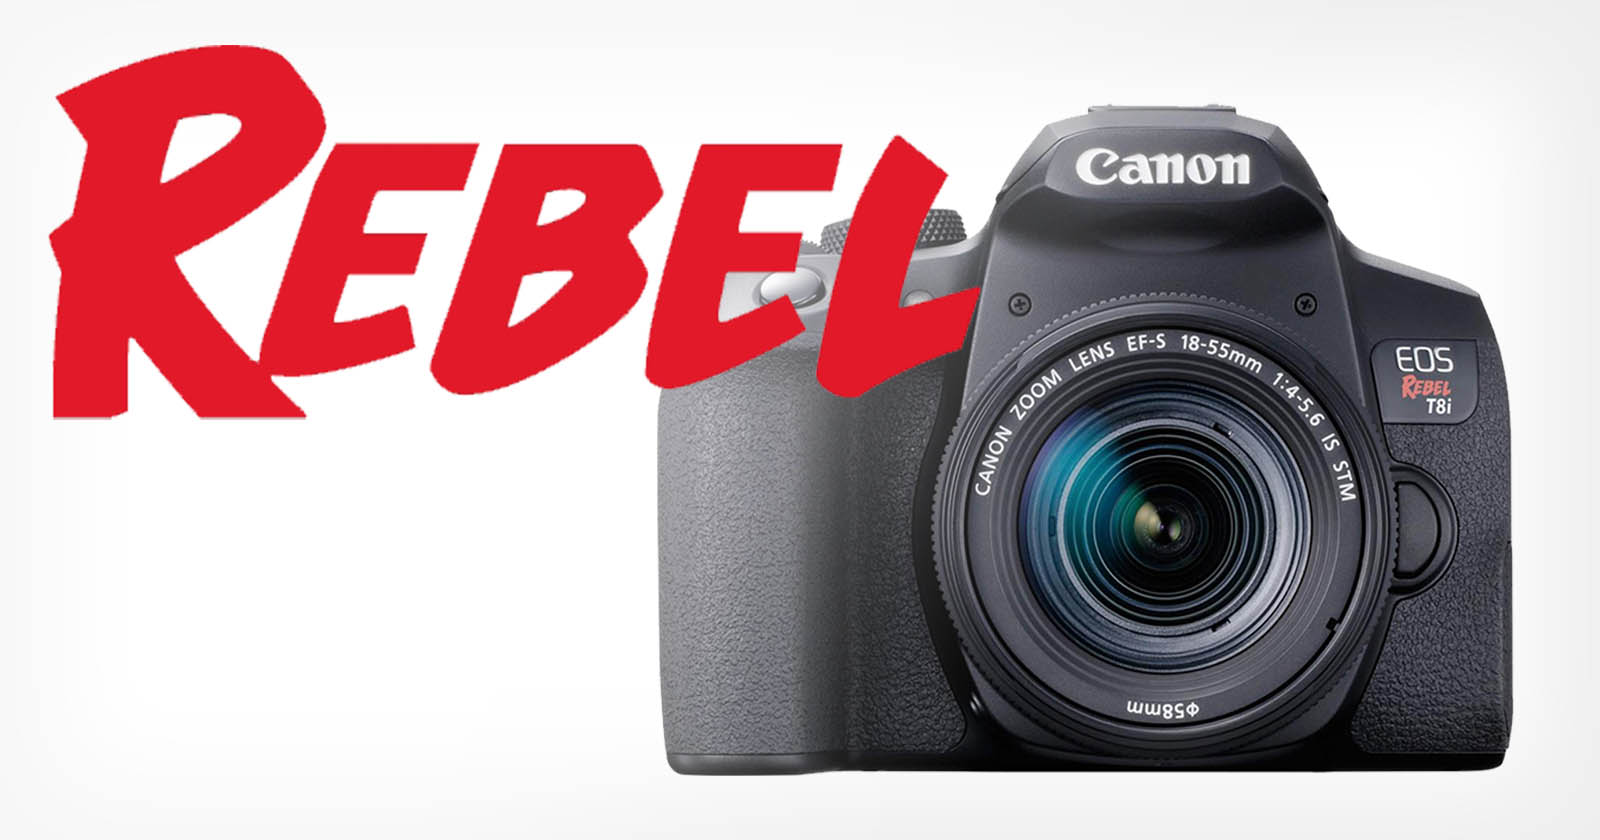 Canon Rebel: A Guide to the Popular Beginner Camera |